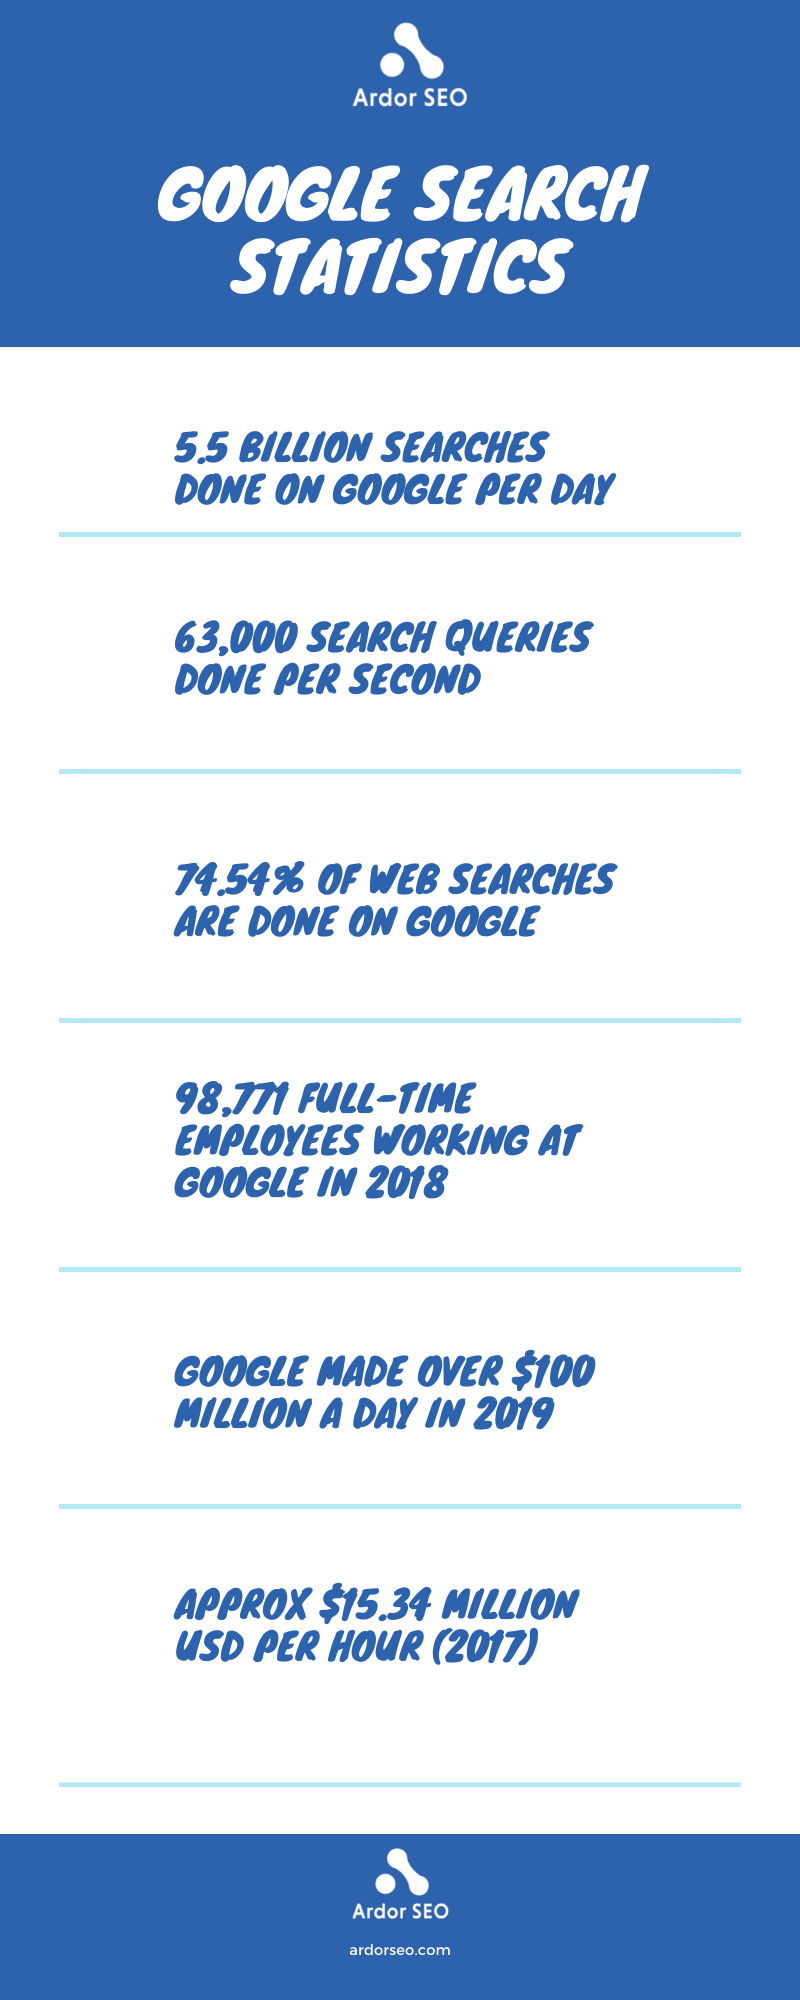 Google Search Statistics - infographic from Ardorseo.com